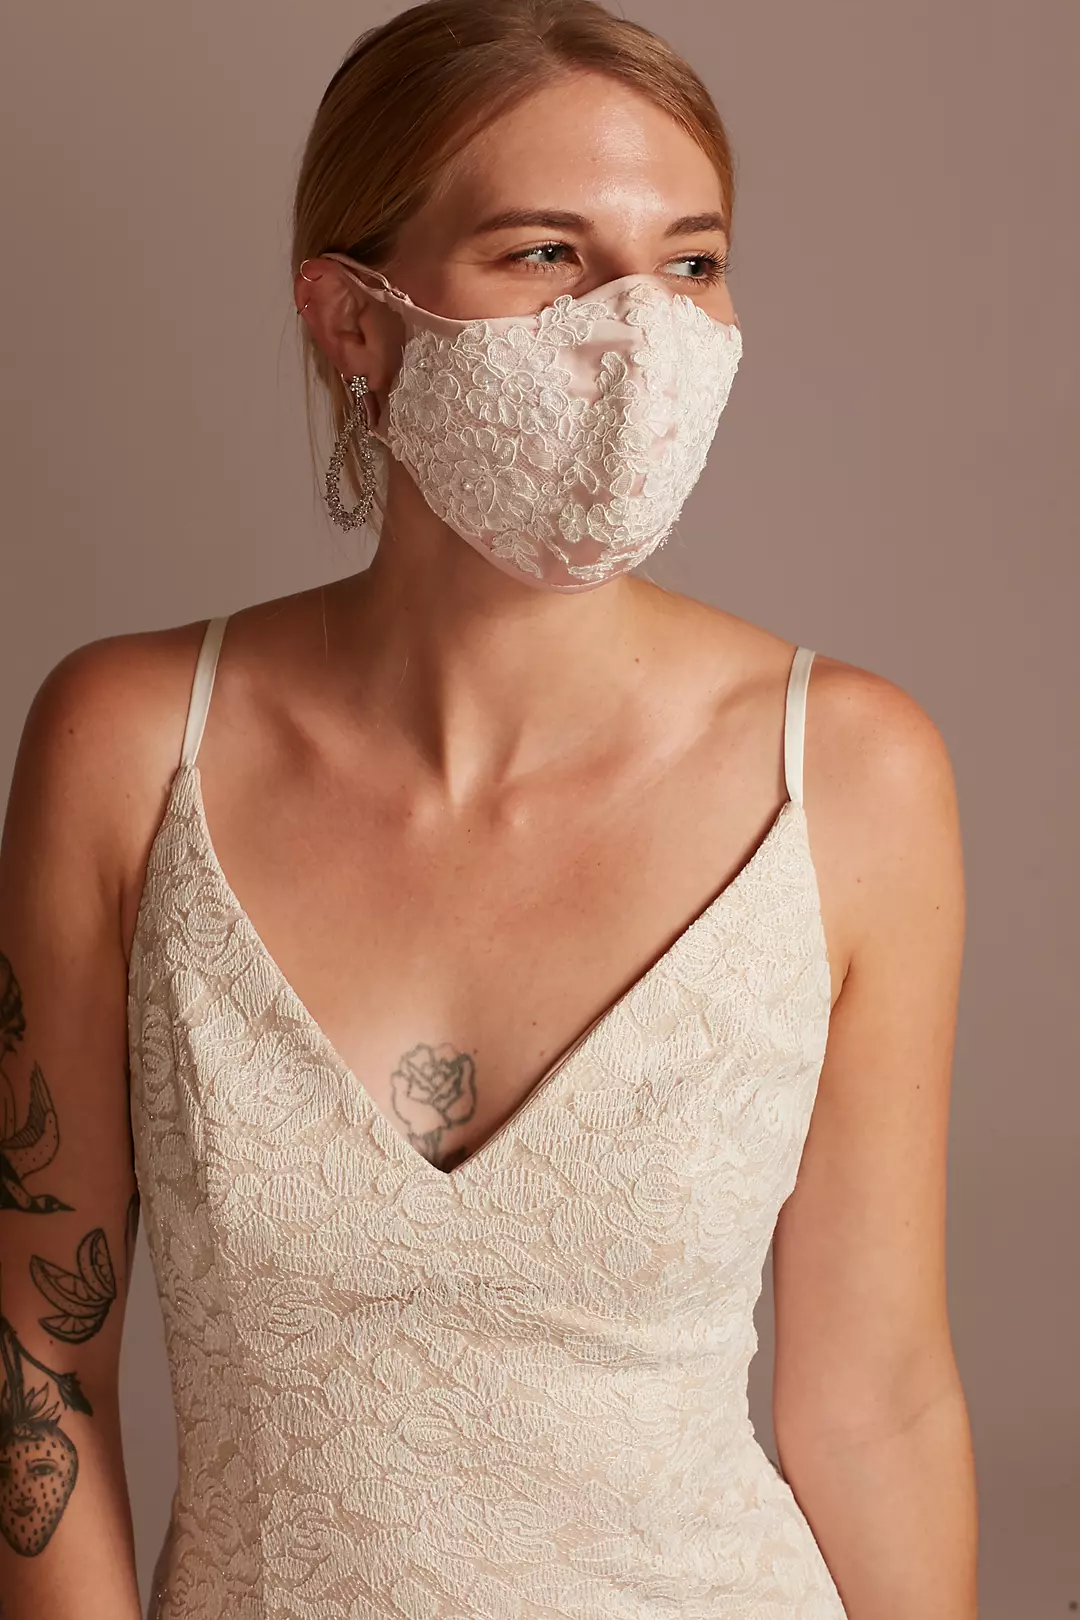 Satin Fashion Face Mask with Floral Lace Applique Image